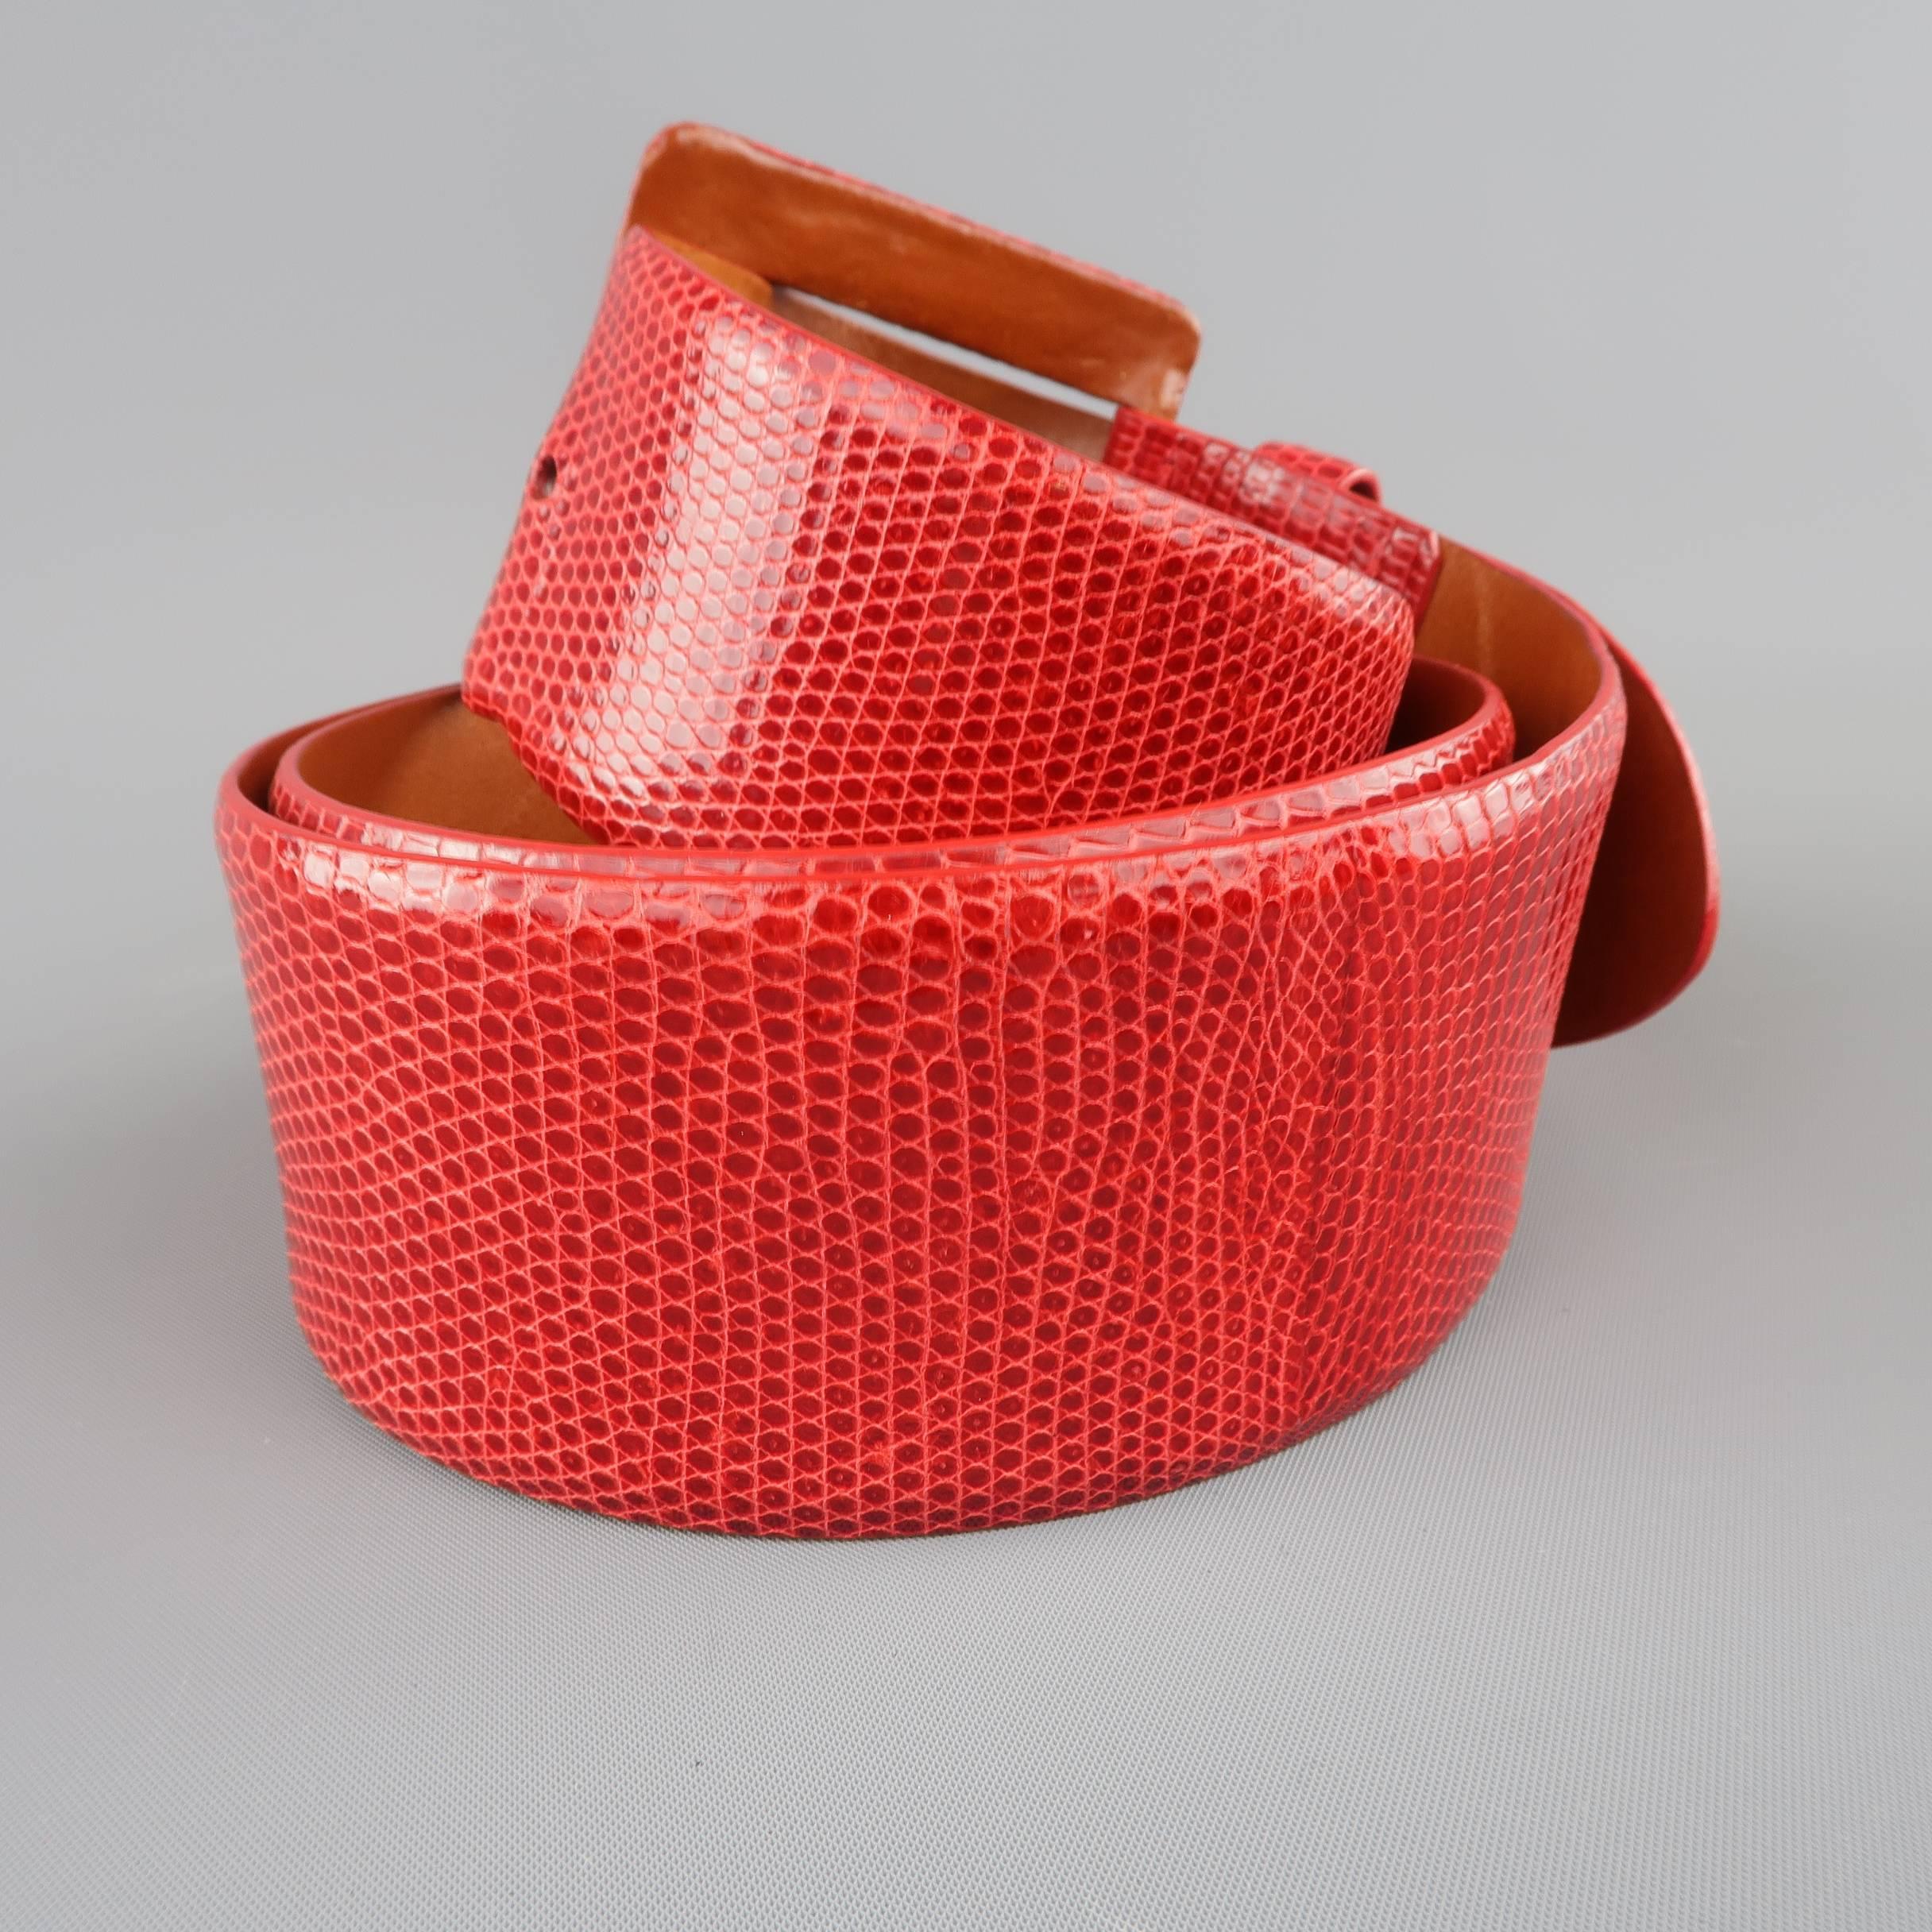 RALPH LAUREN COLLECTION waist belt comes in red lizard skin leather and features a large covered buckle with gold tone hardware. Made in Italy.
 
Good Pre-Owned Condition.
Marked: L
 
Length: 42 in.
Width: 1.85 in.
Fits: 35-39 in.


SKU: 85490